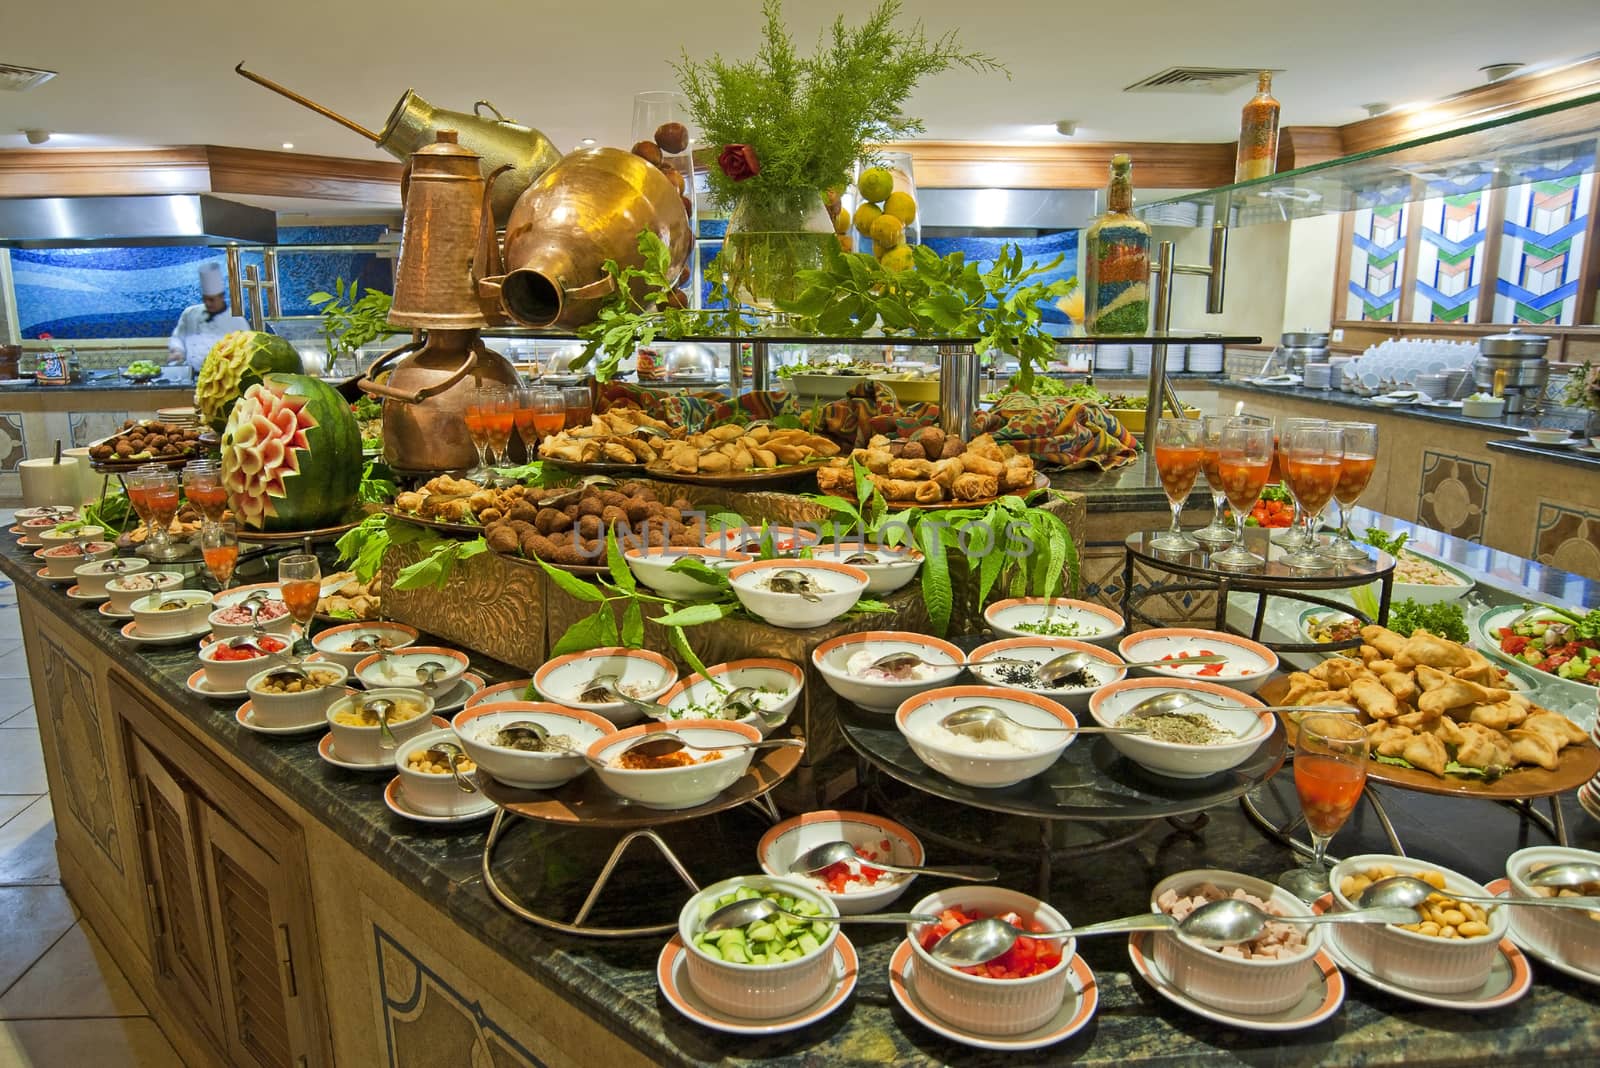 Selection of salads at a buffet bar in a luxury hotel restaurant